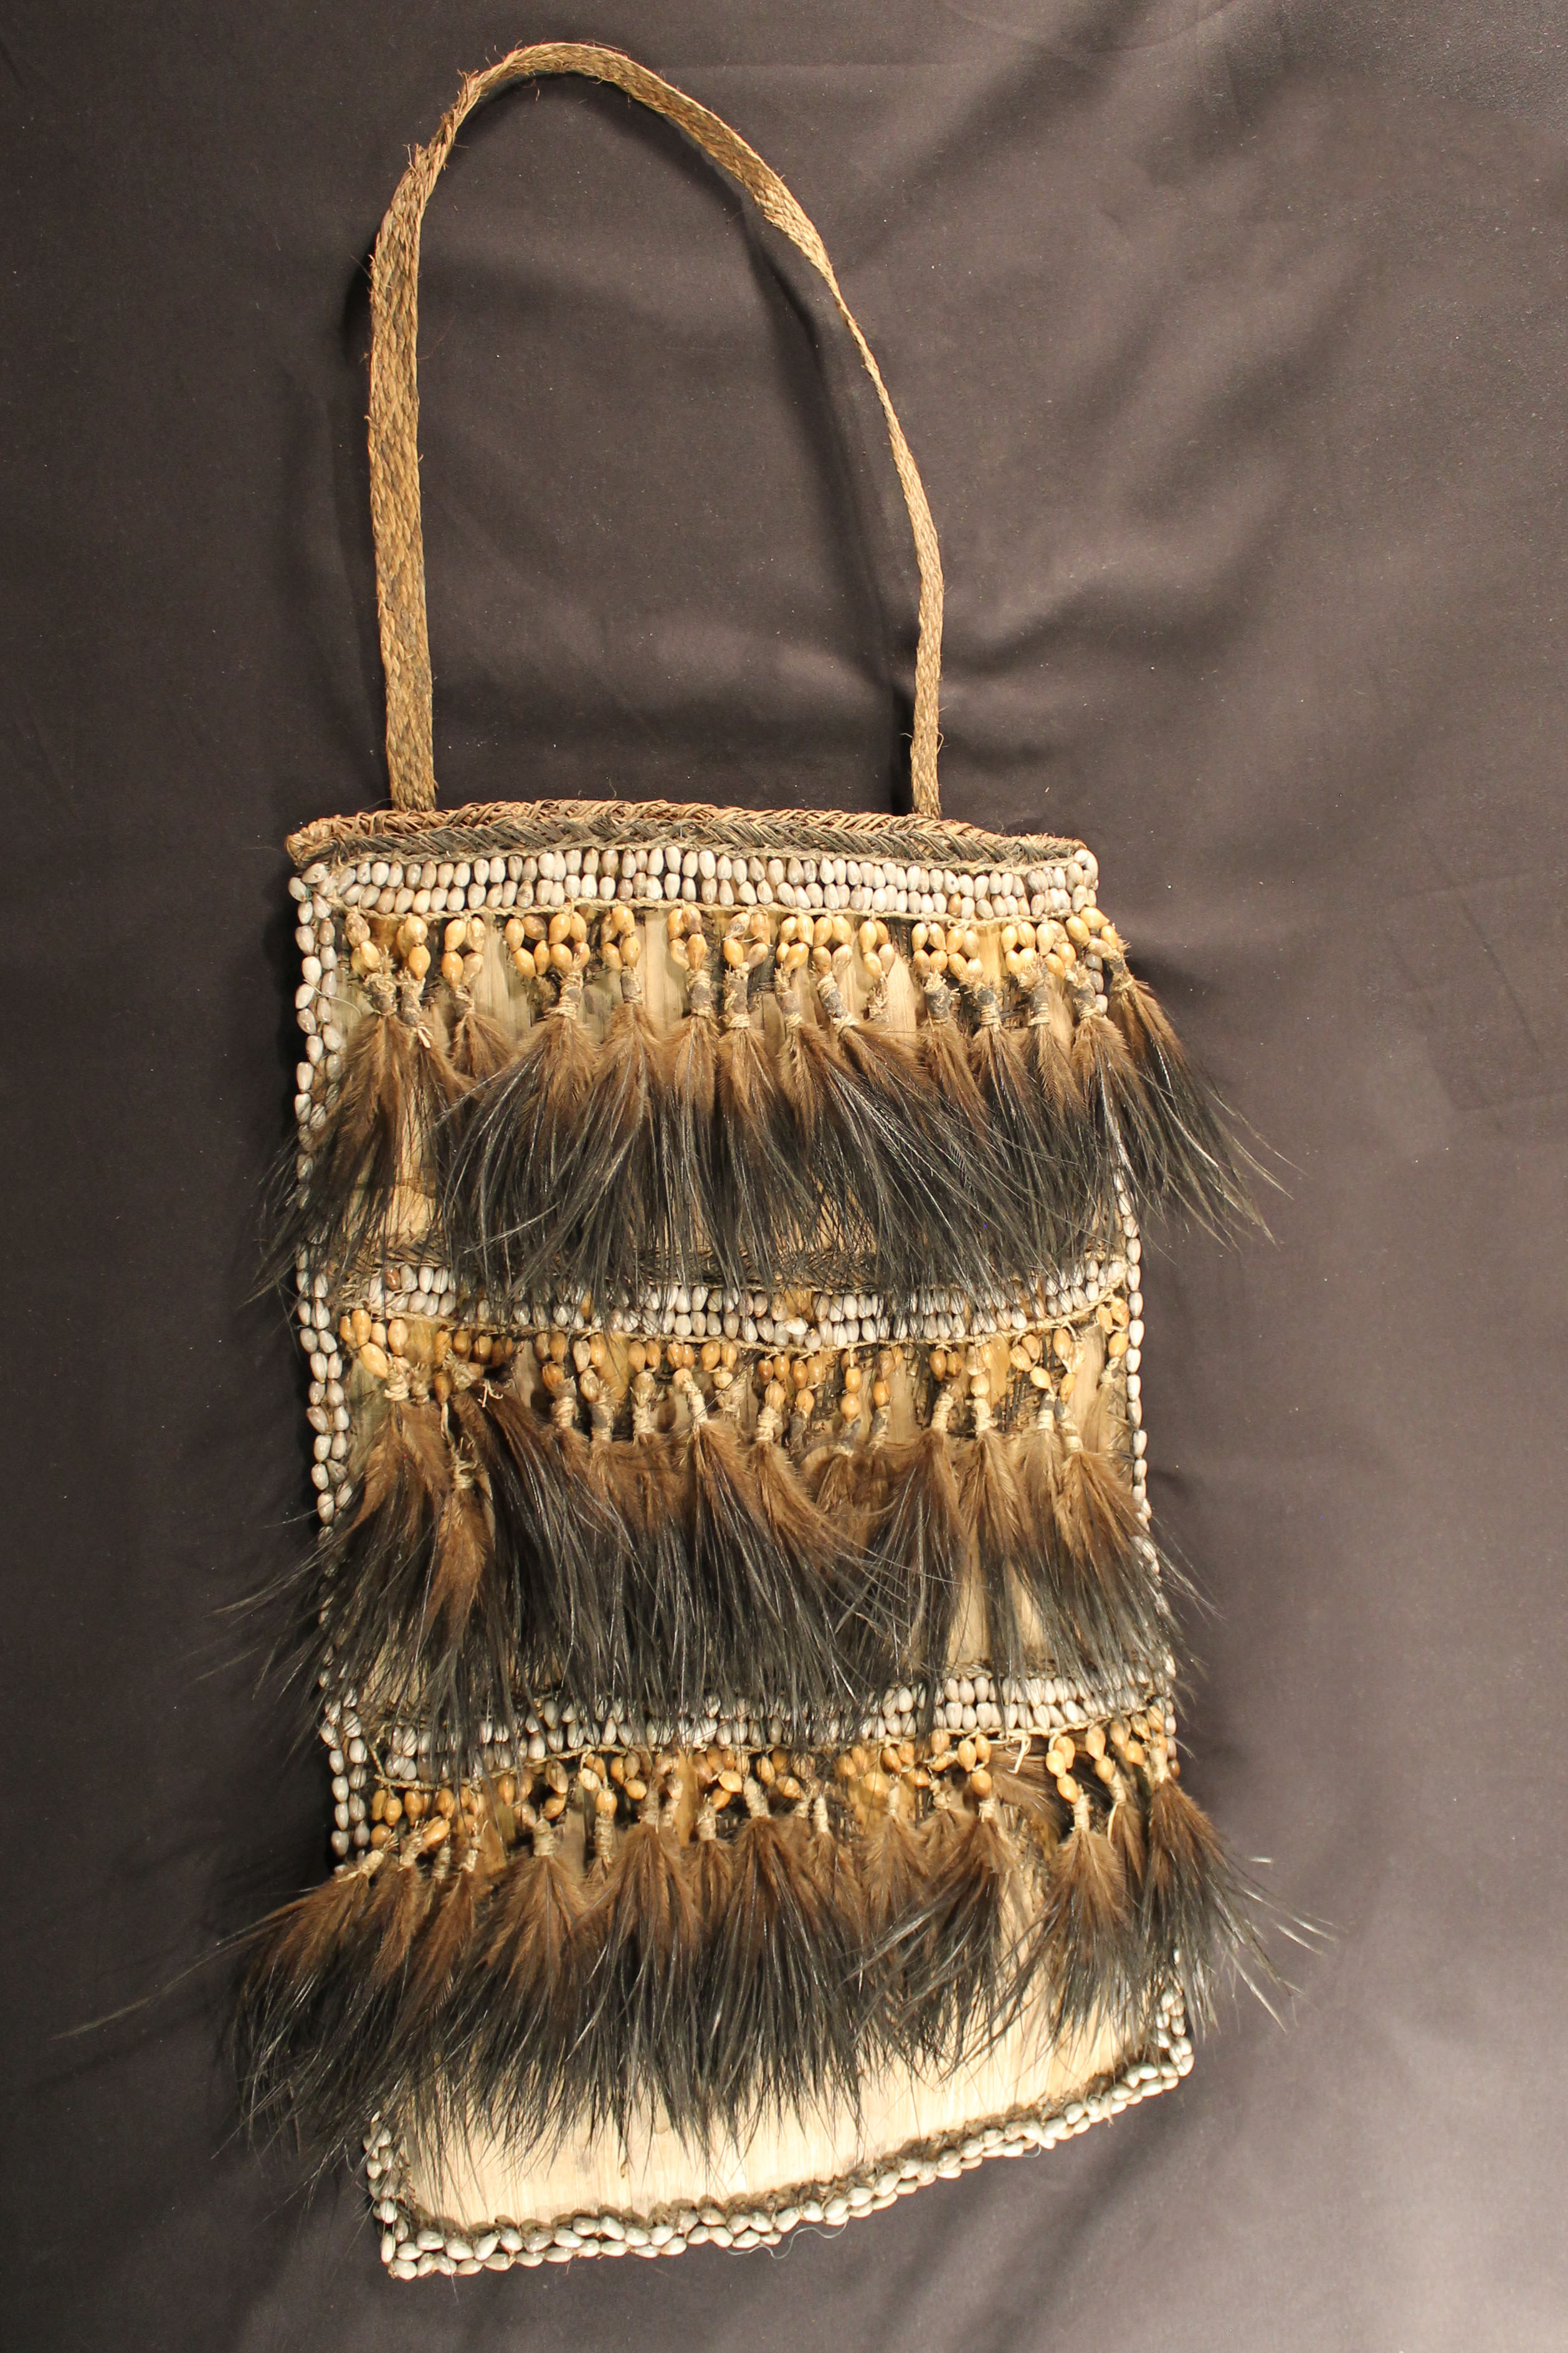 Woven bag with symbolic designs that has three-rows of seed beads and tassel feathers